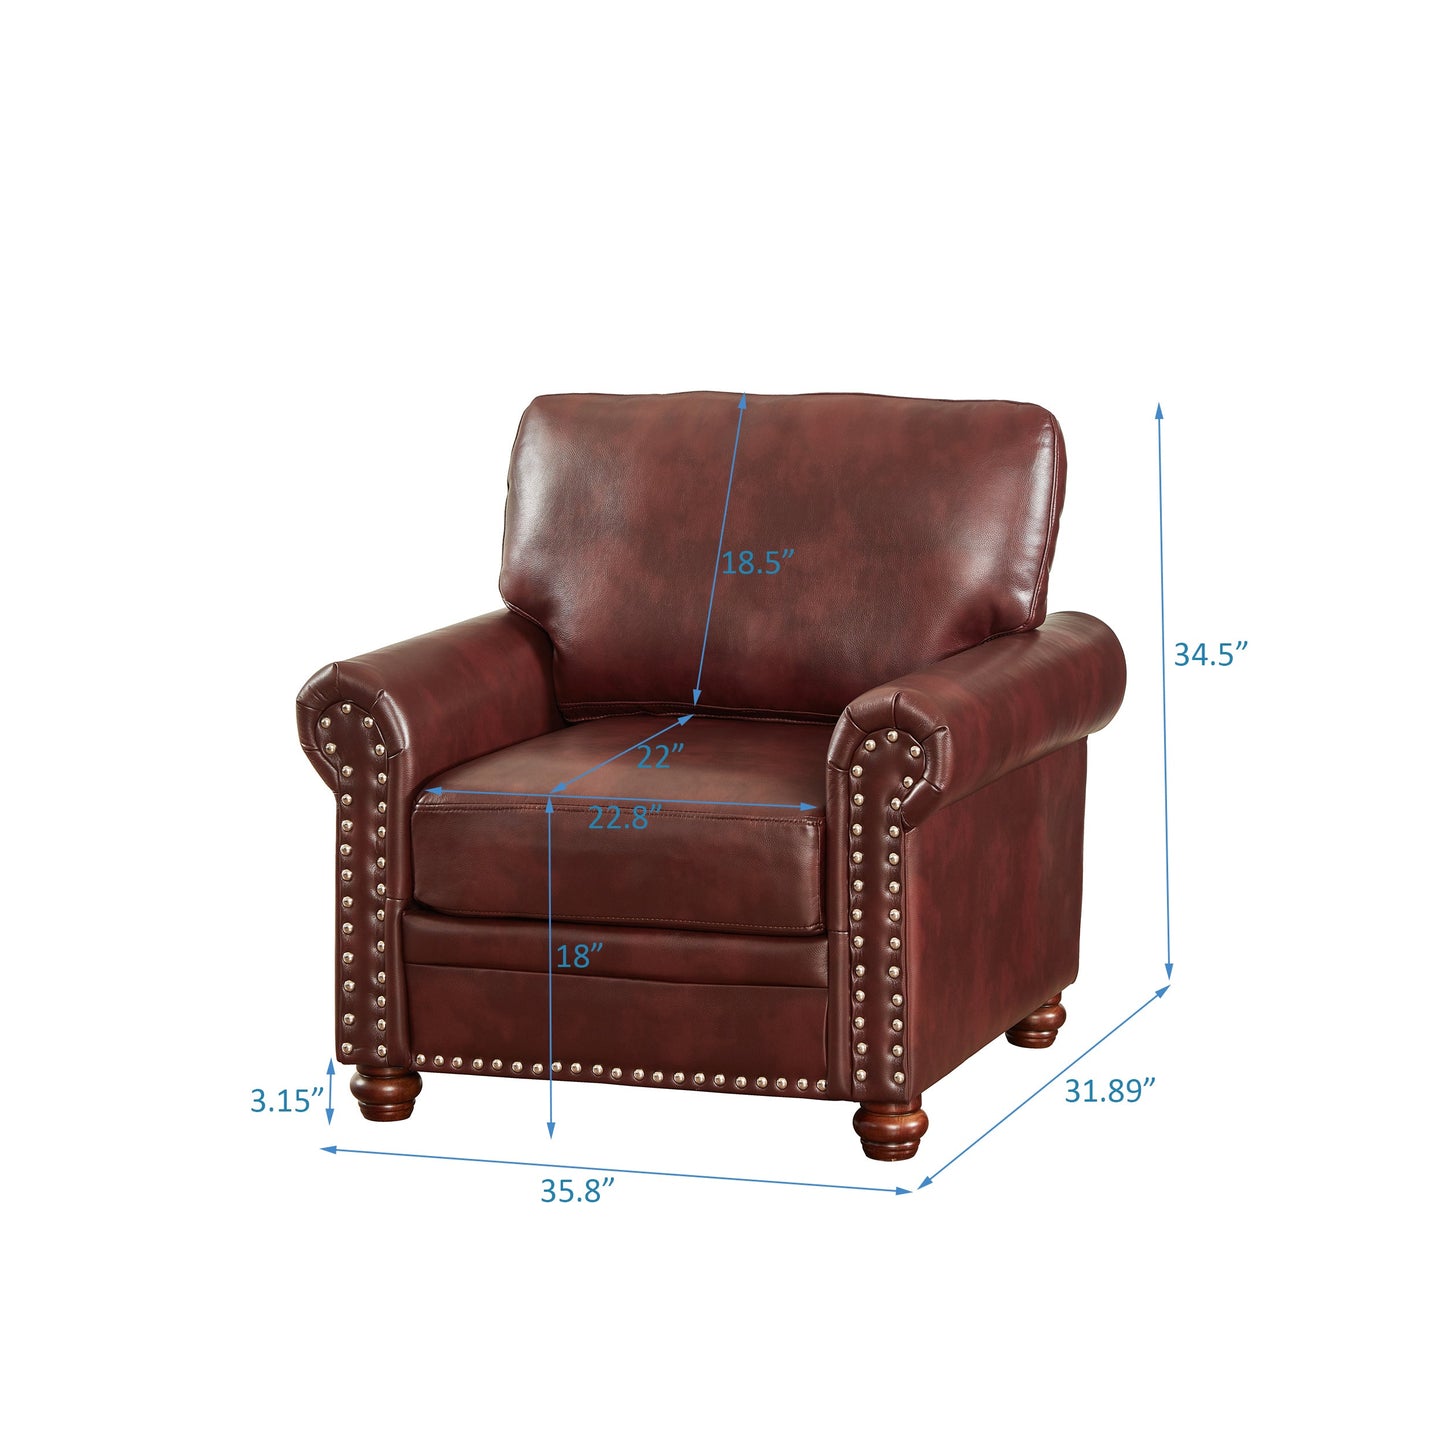 Living Room Sofa Single Seat Chair with Wood Leg Burgundy Faux Leather